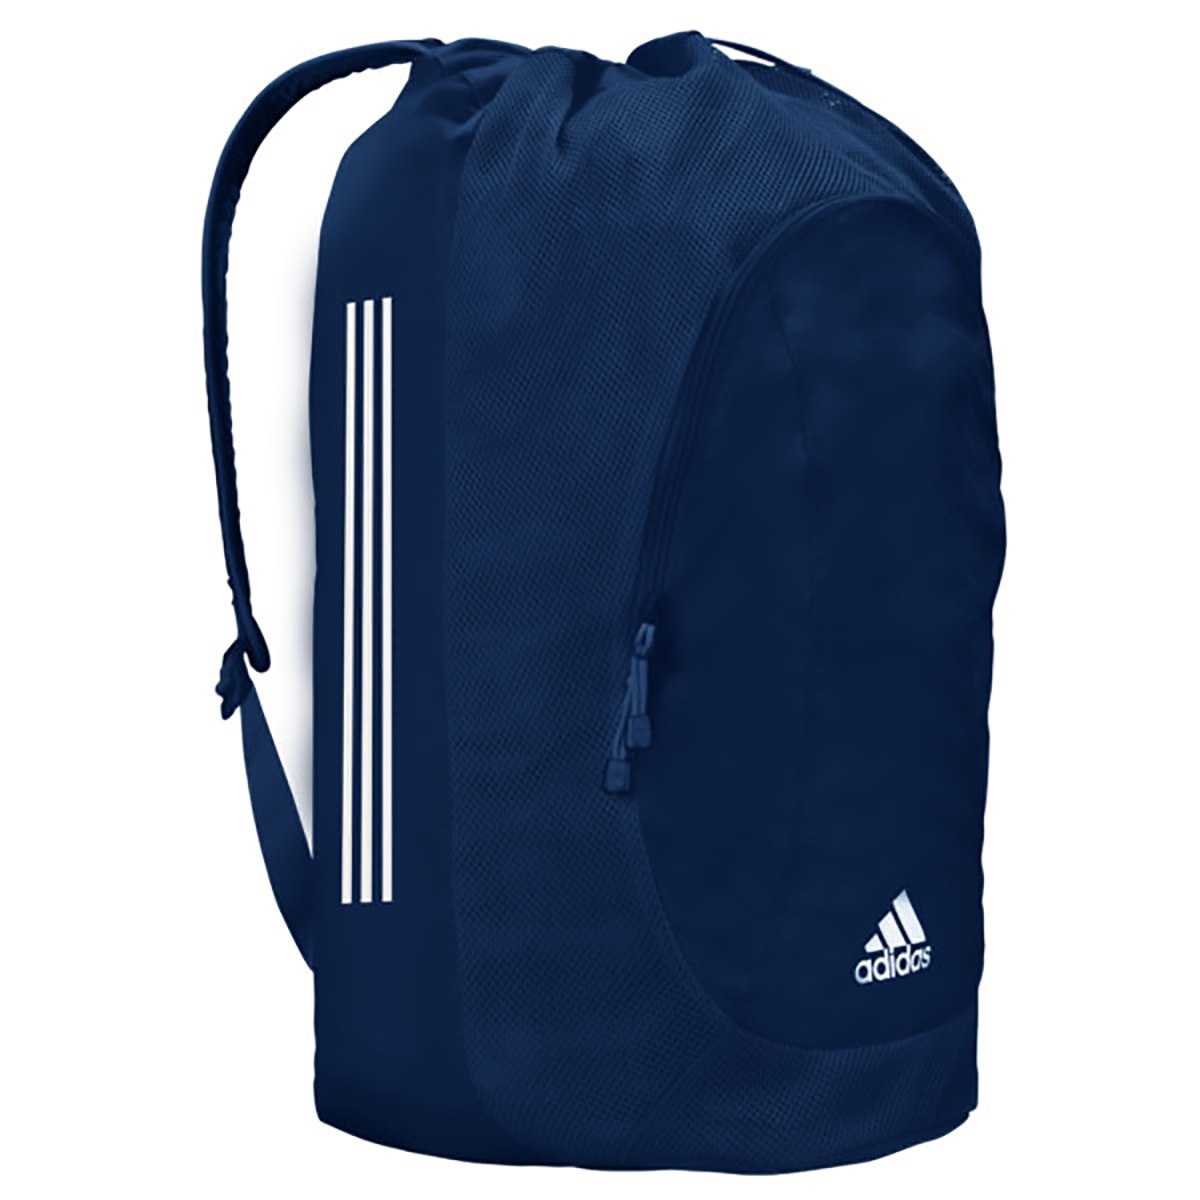 Adidas Wrestling Gear Bag 2.0 A514720 - Various Colors - image 2 of 4